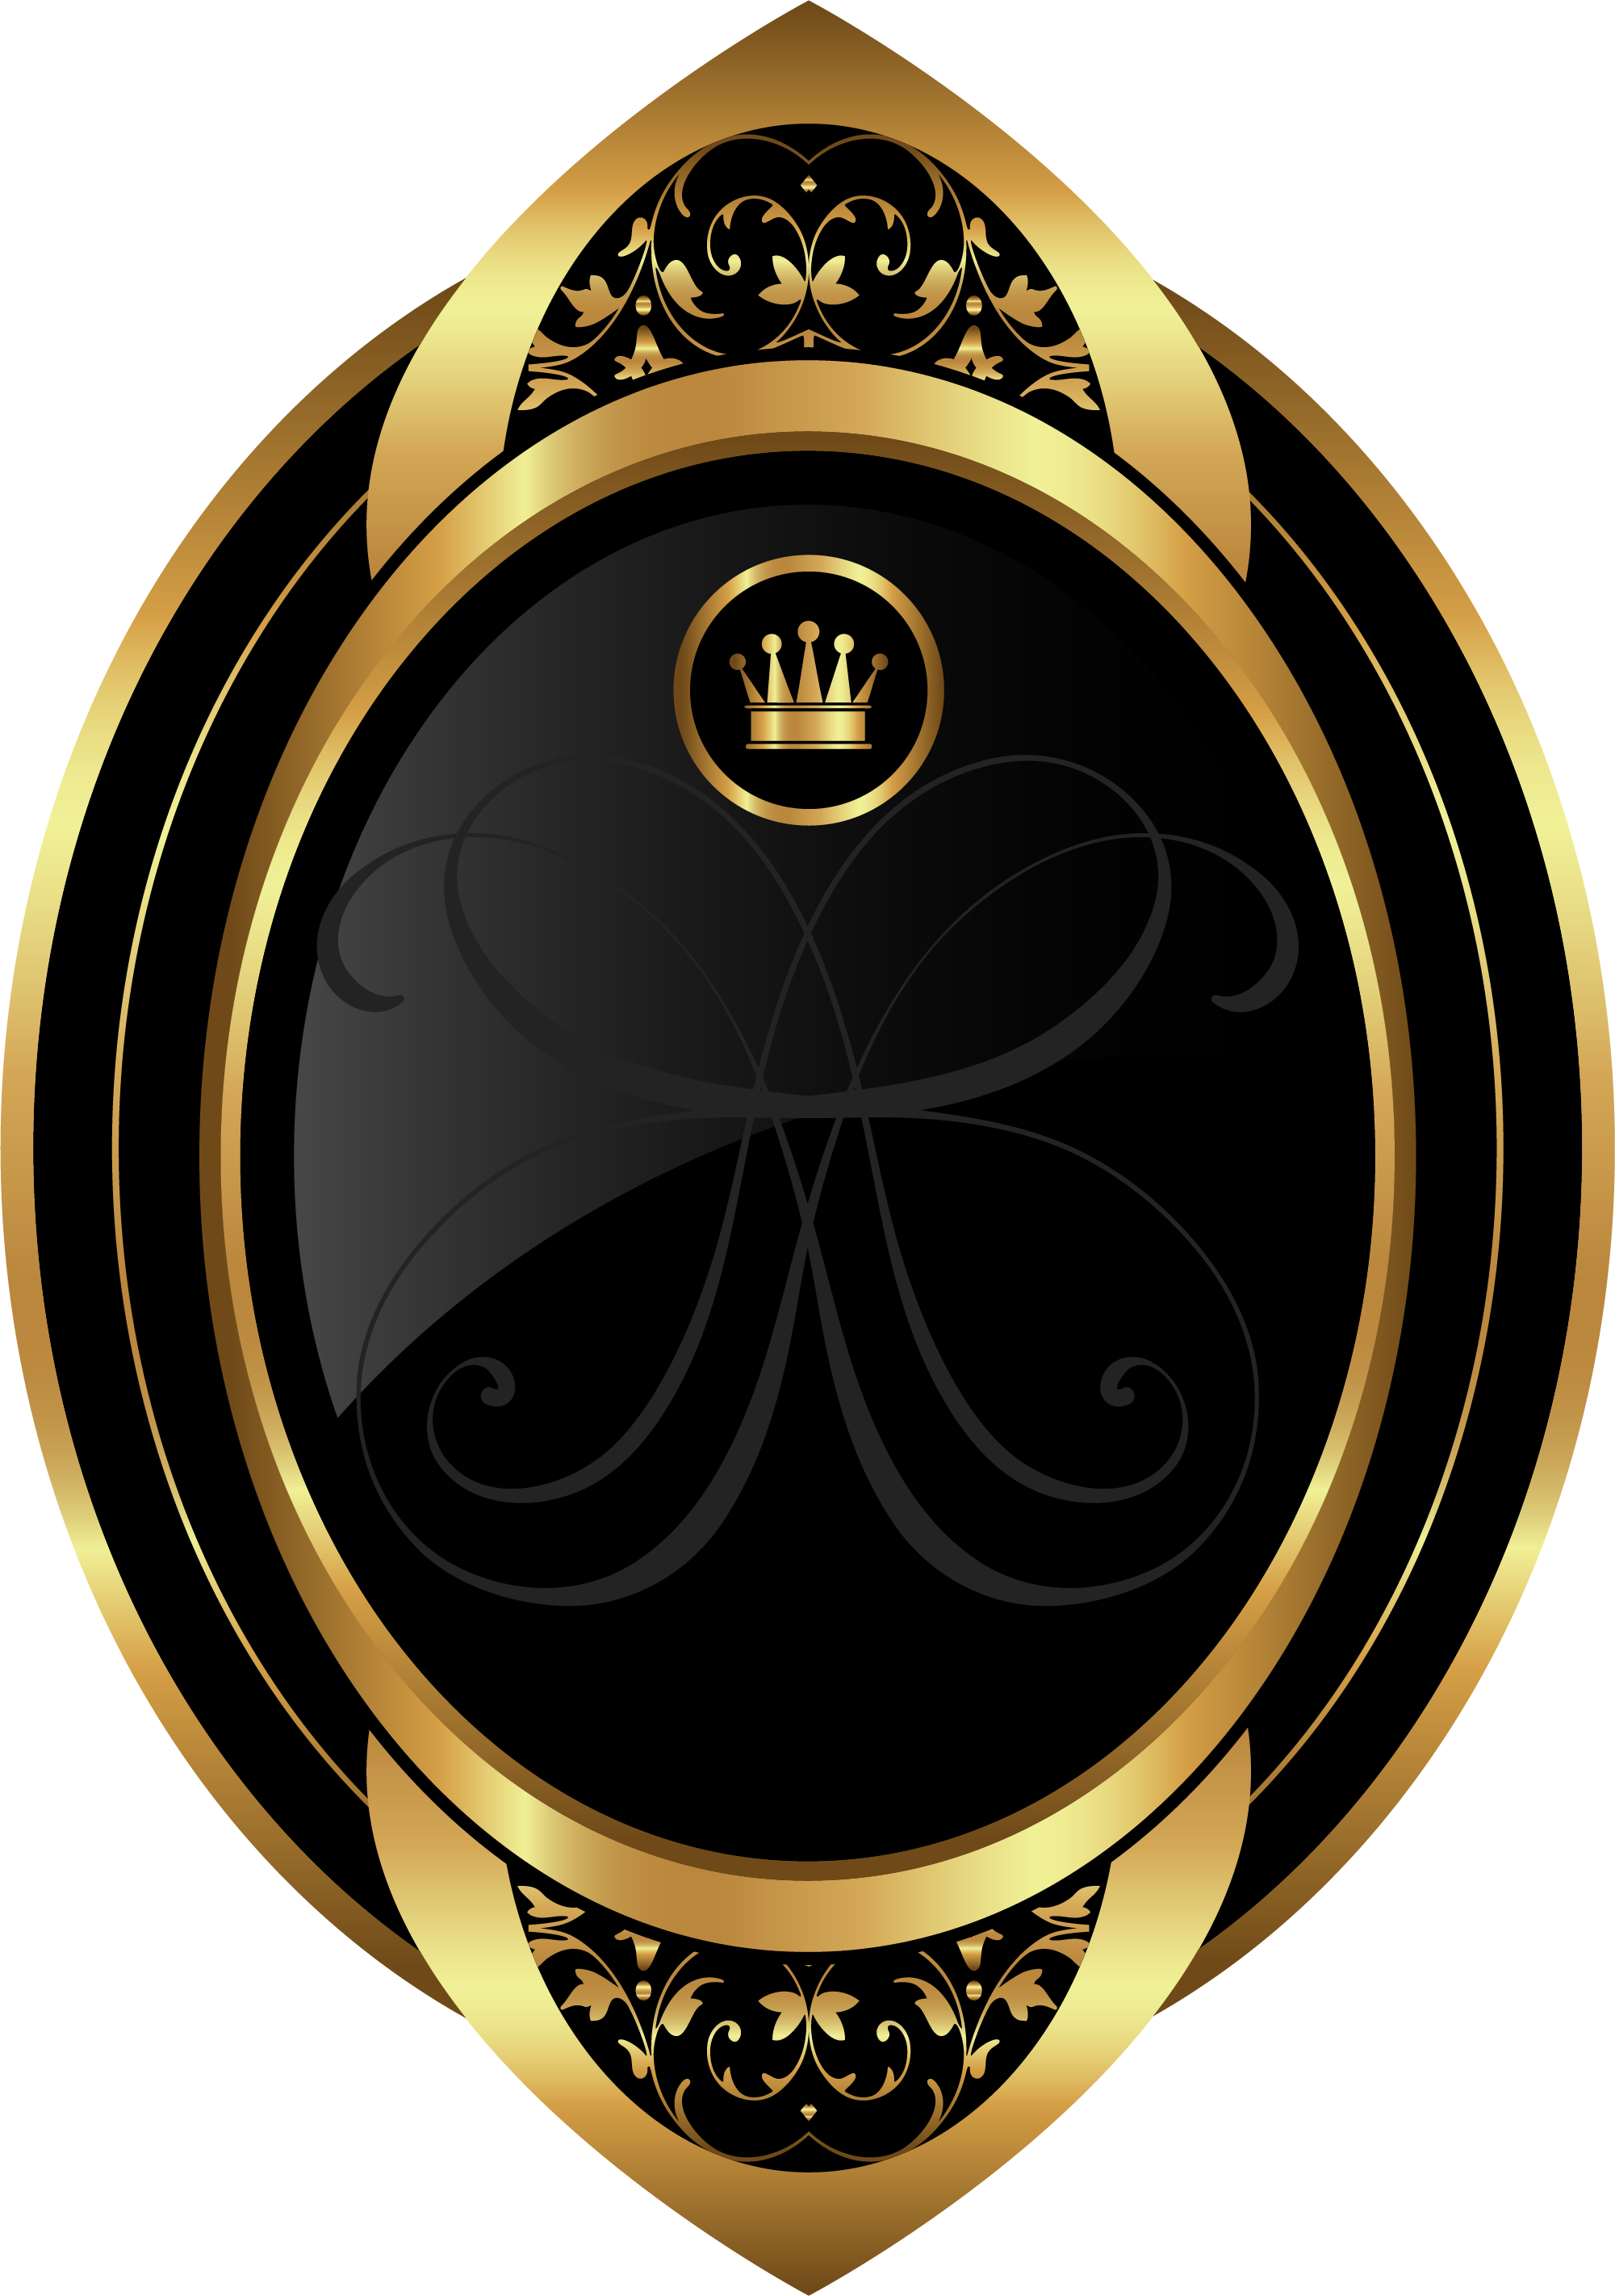 Download Painted Golden Crown Hand Free Clipart HQ HQ PNG Image